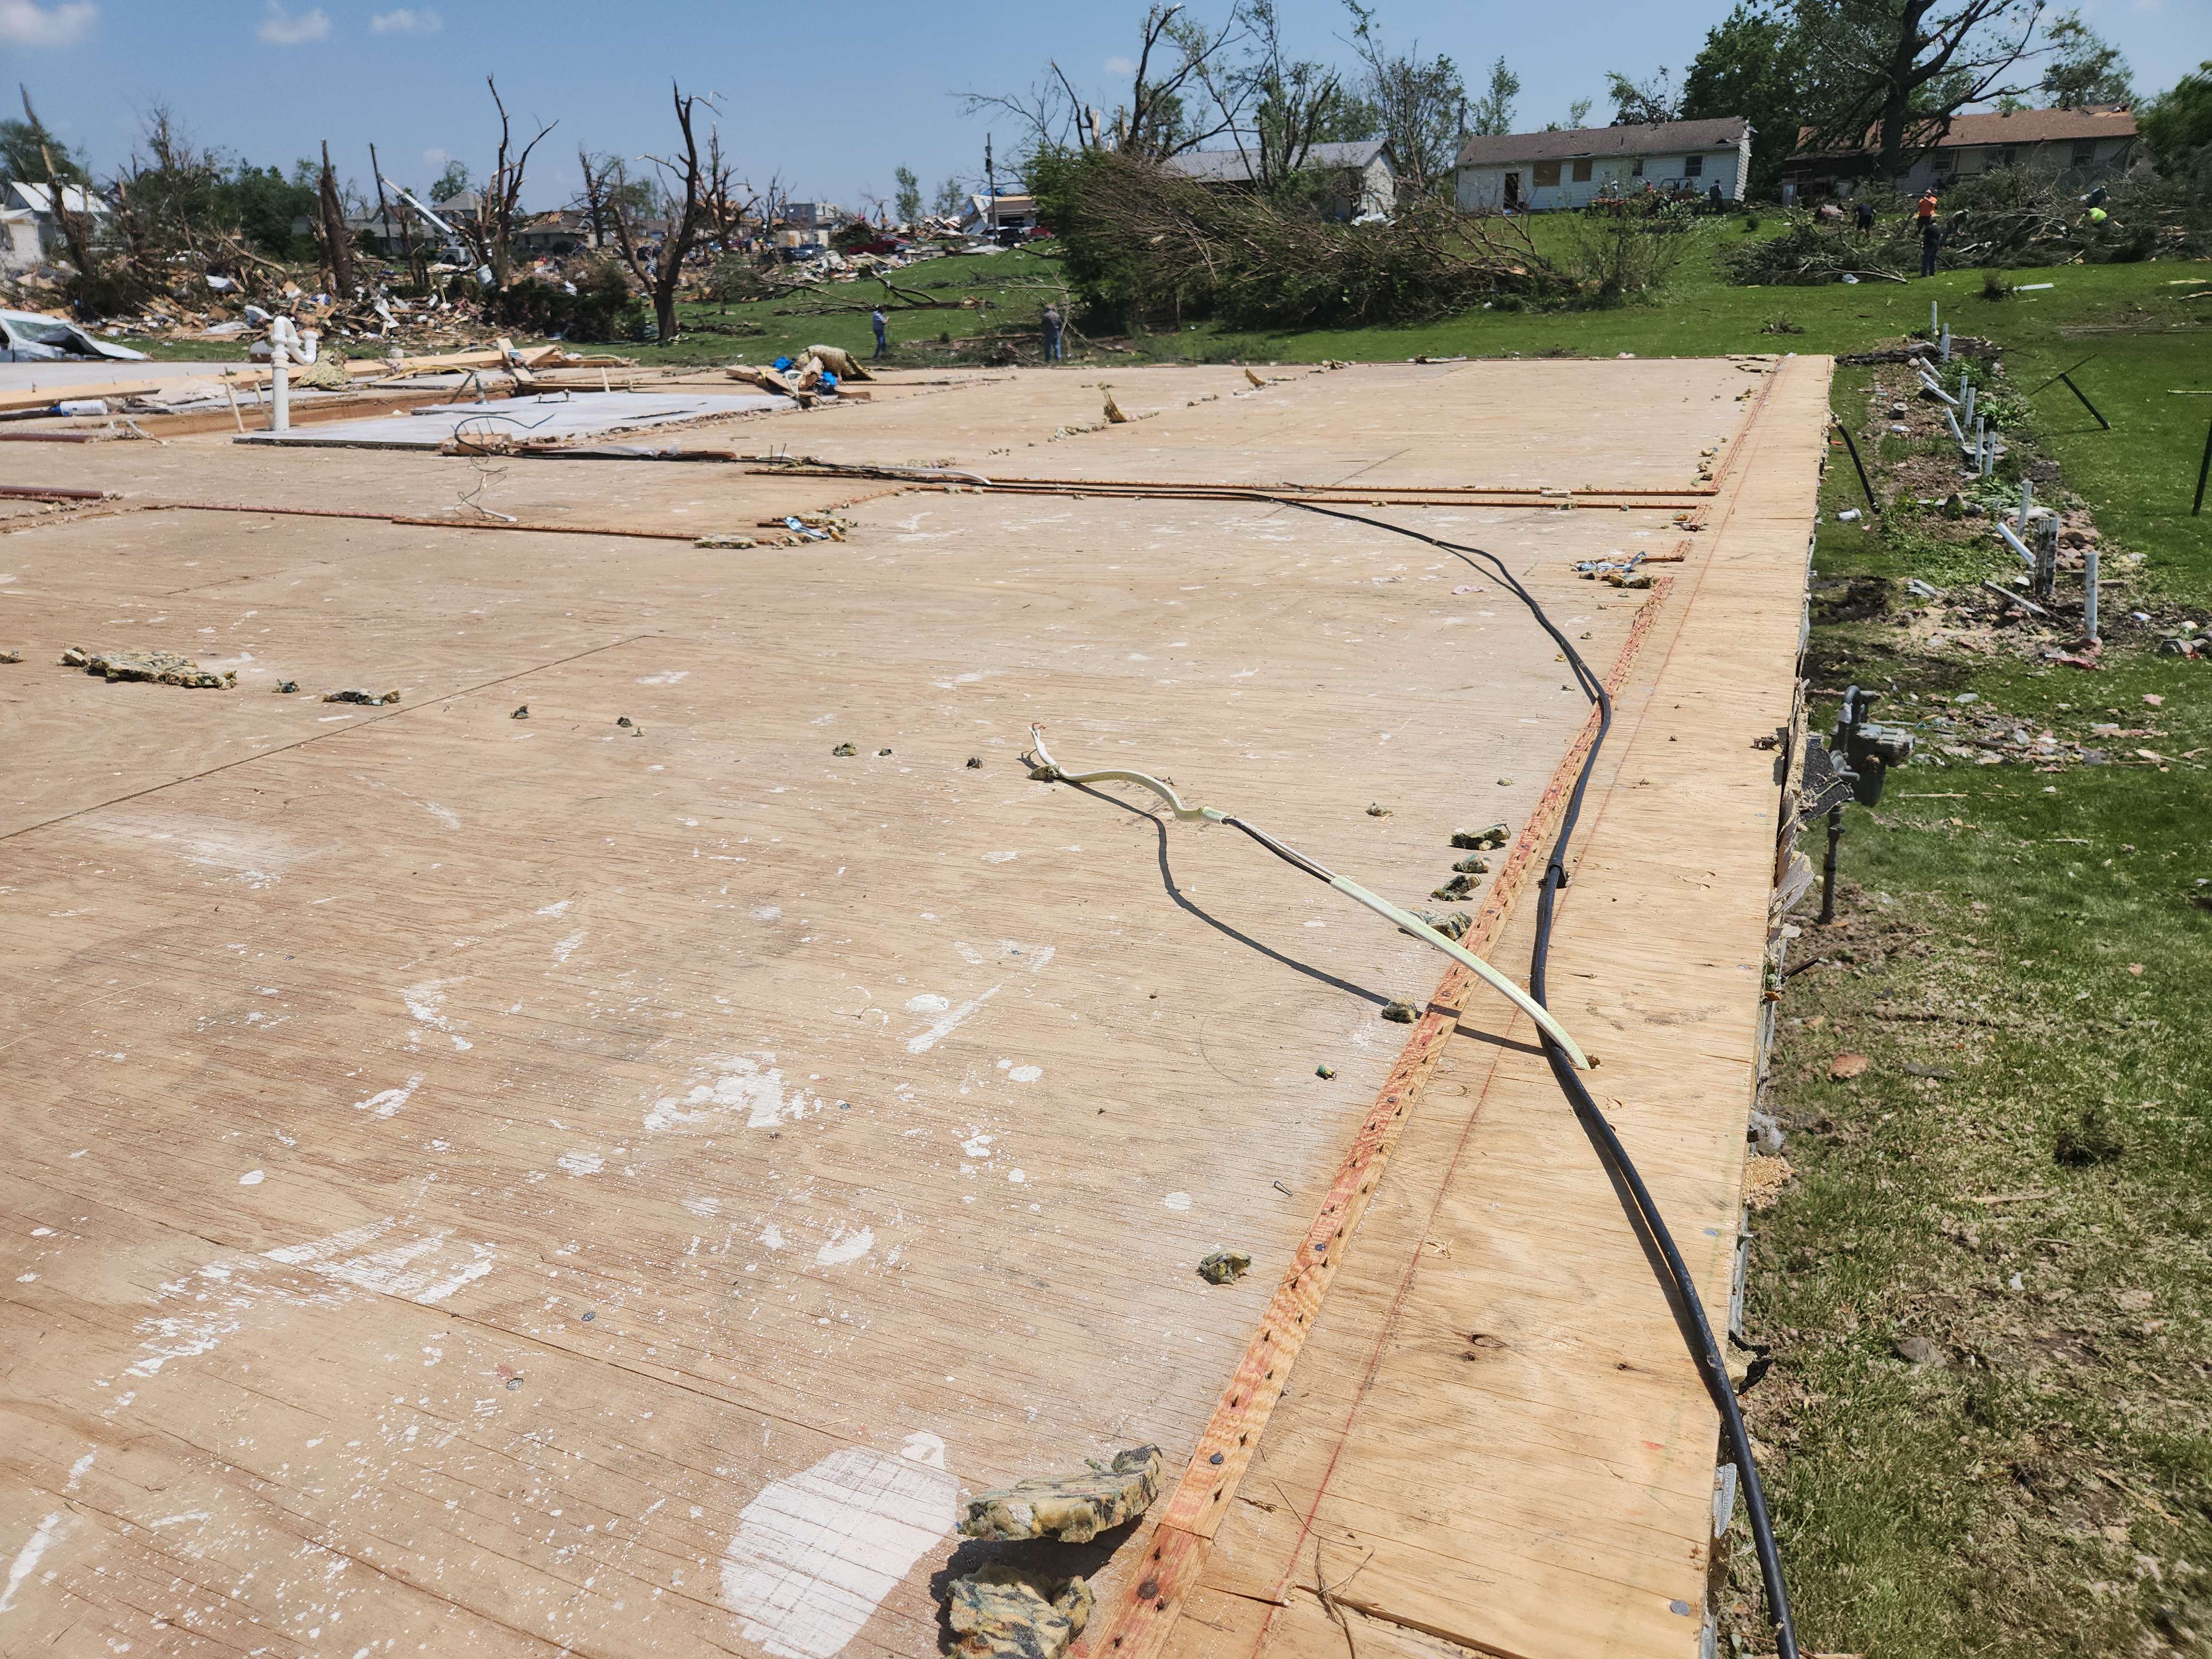 A home that was leveled and swept away at EF4 intensity in Greenfield, Iowa.